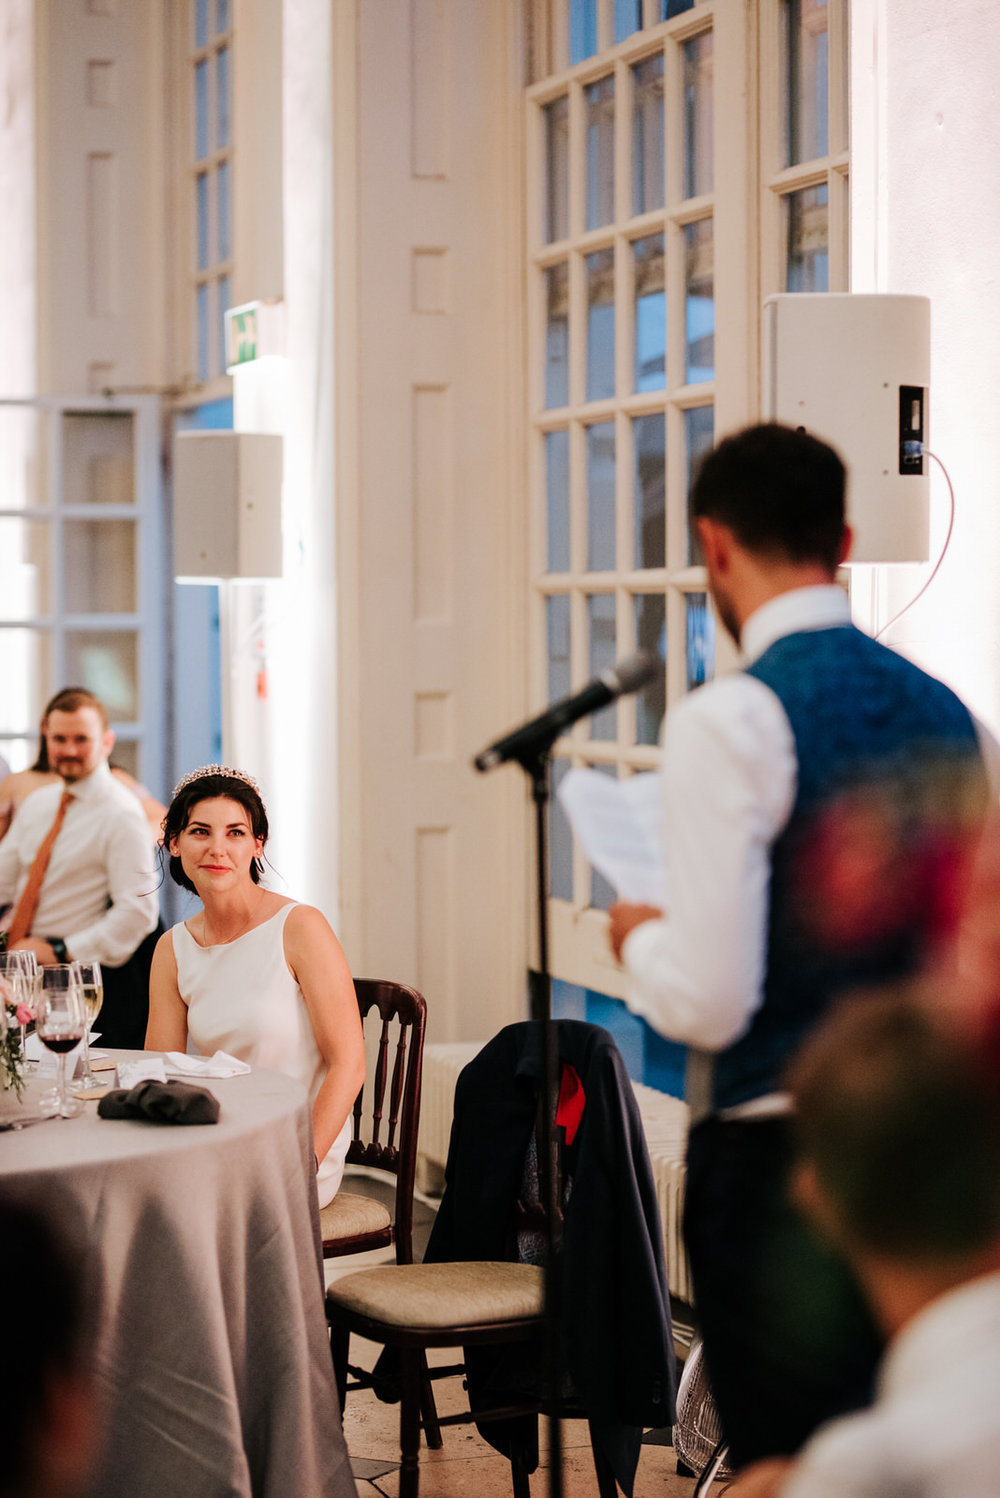  Bride looks emotionally at groom as he finishes delivering his wedding speech 